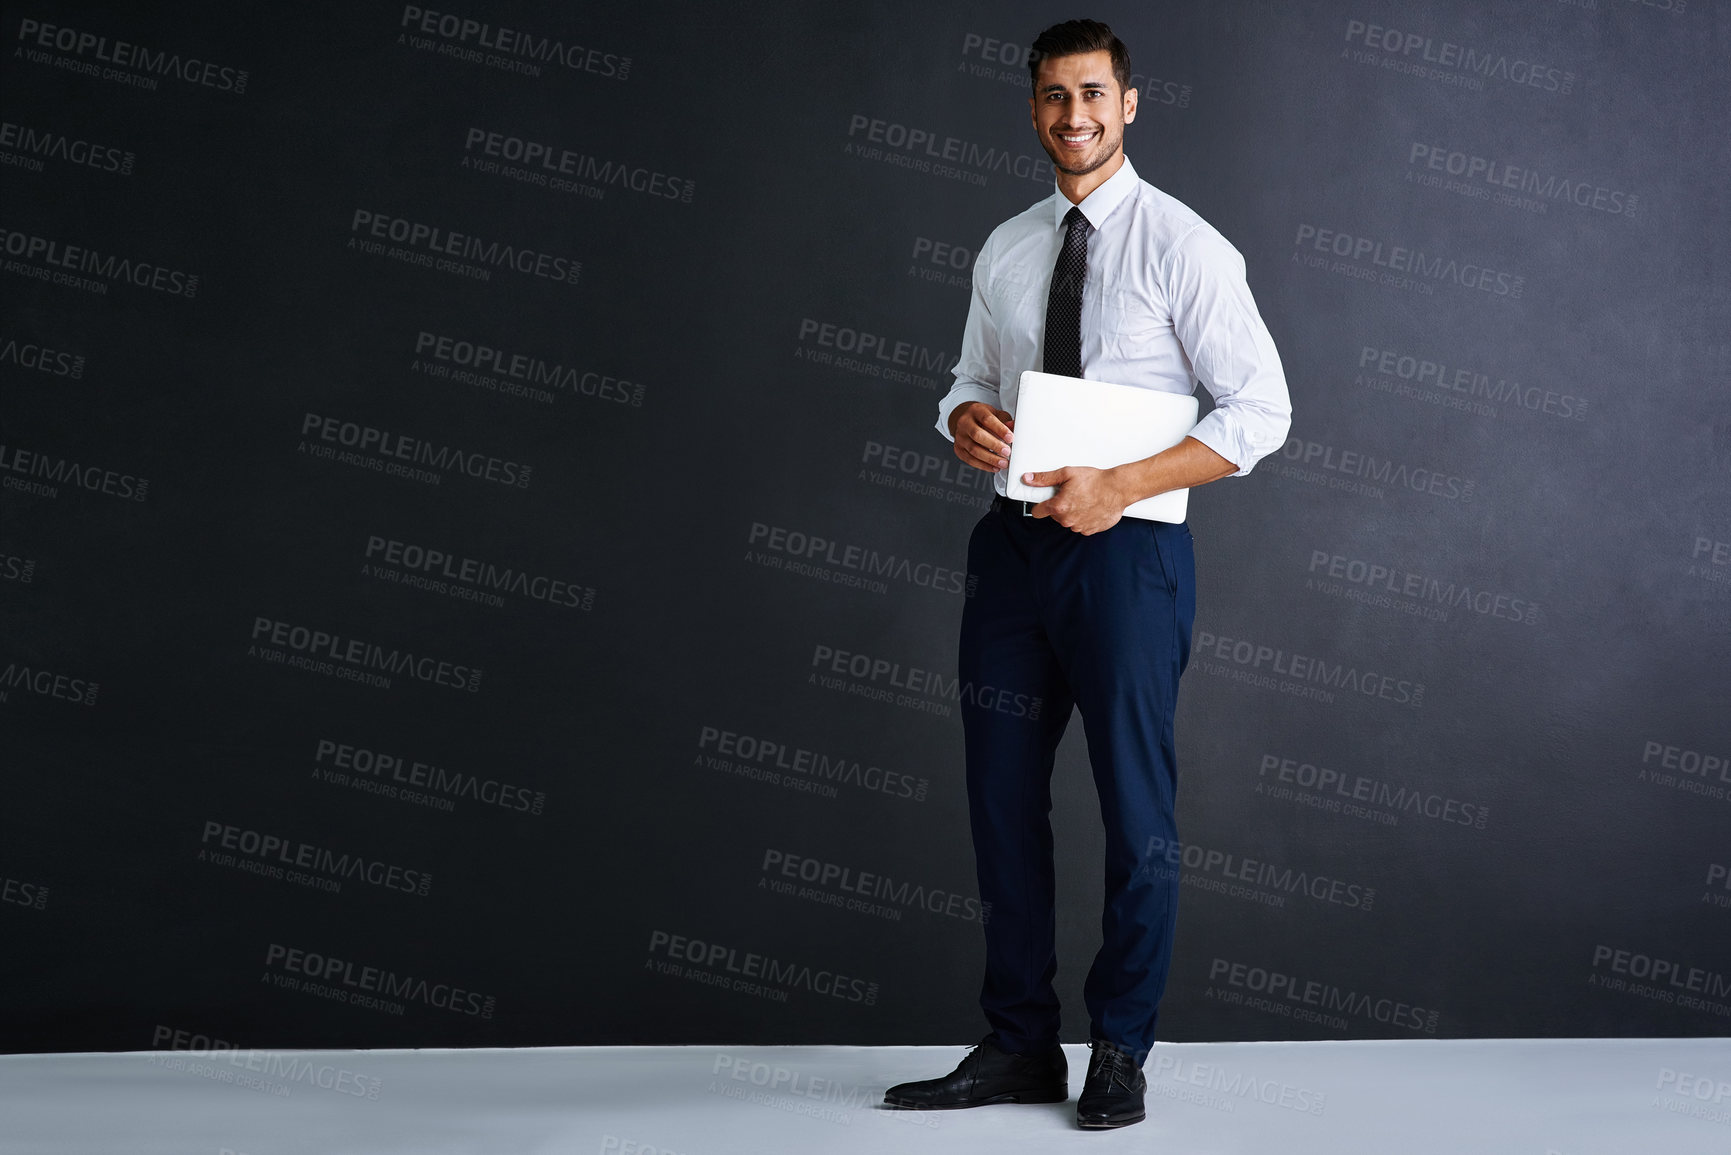 Buy stock photo Studio portrait of a young businessman standing against a black background